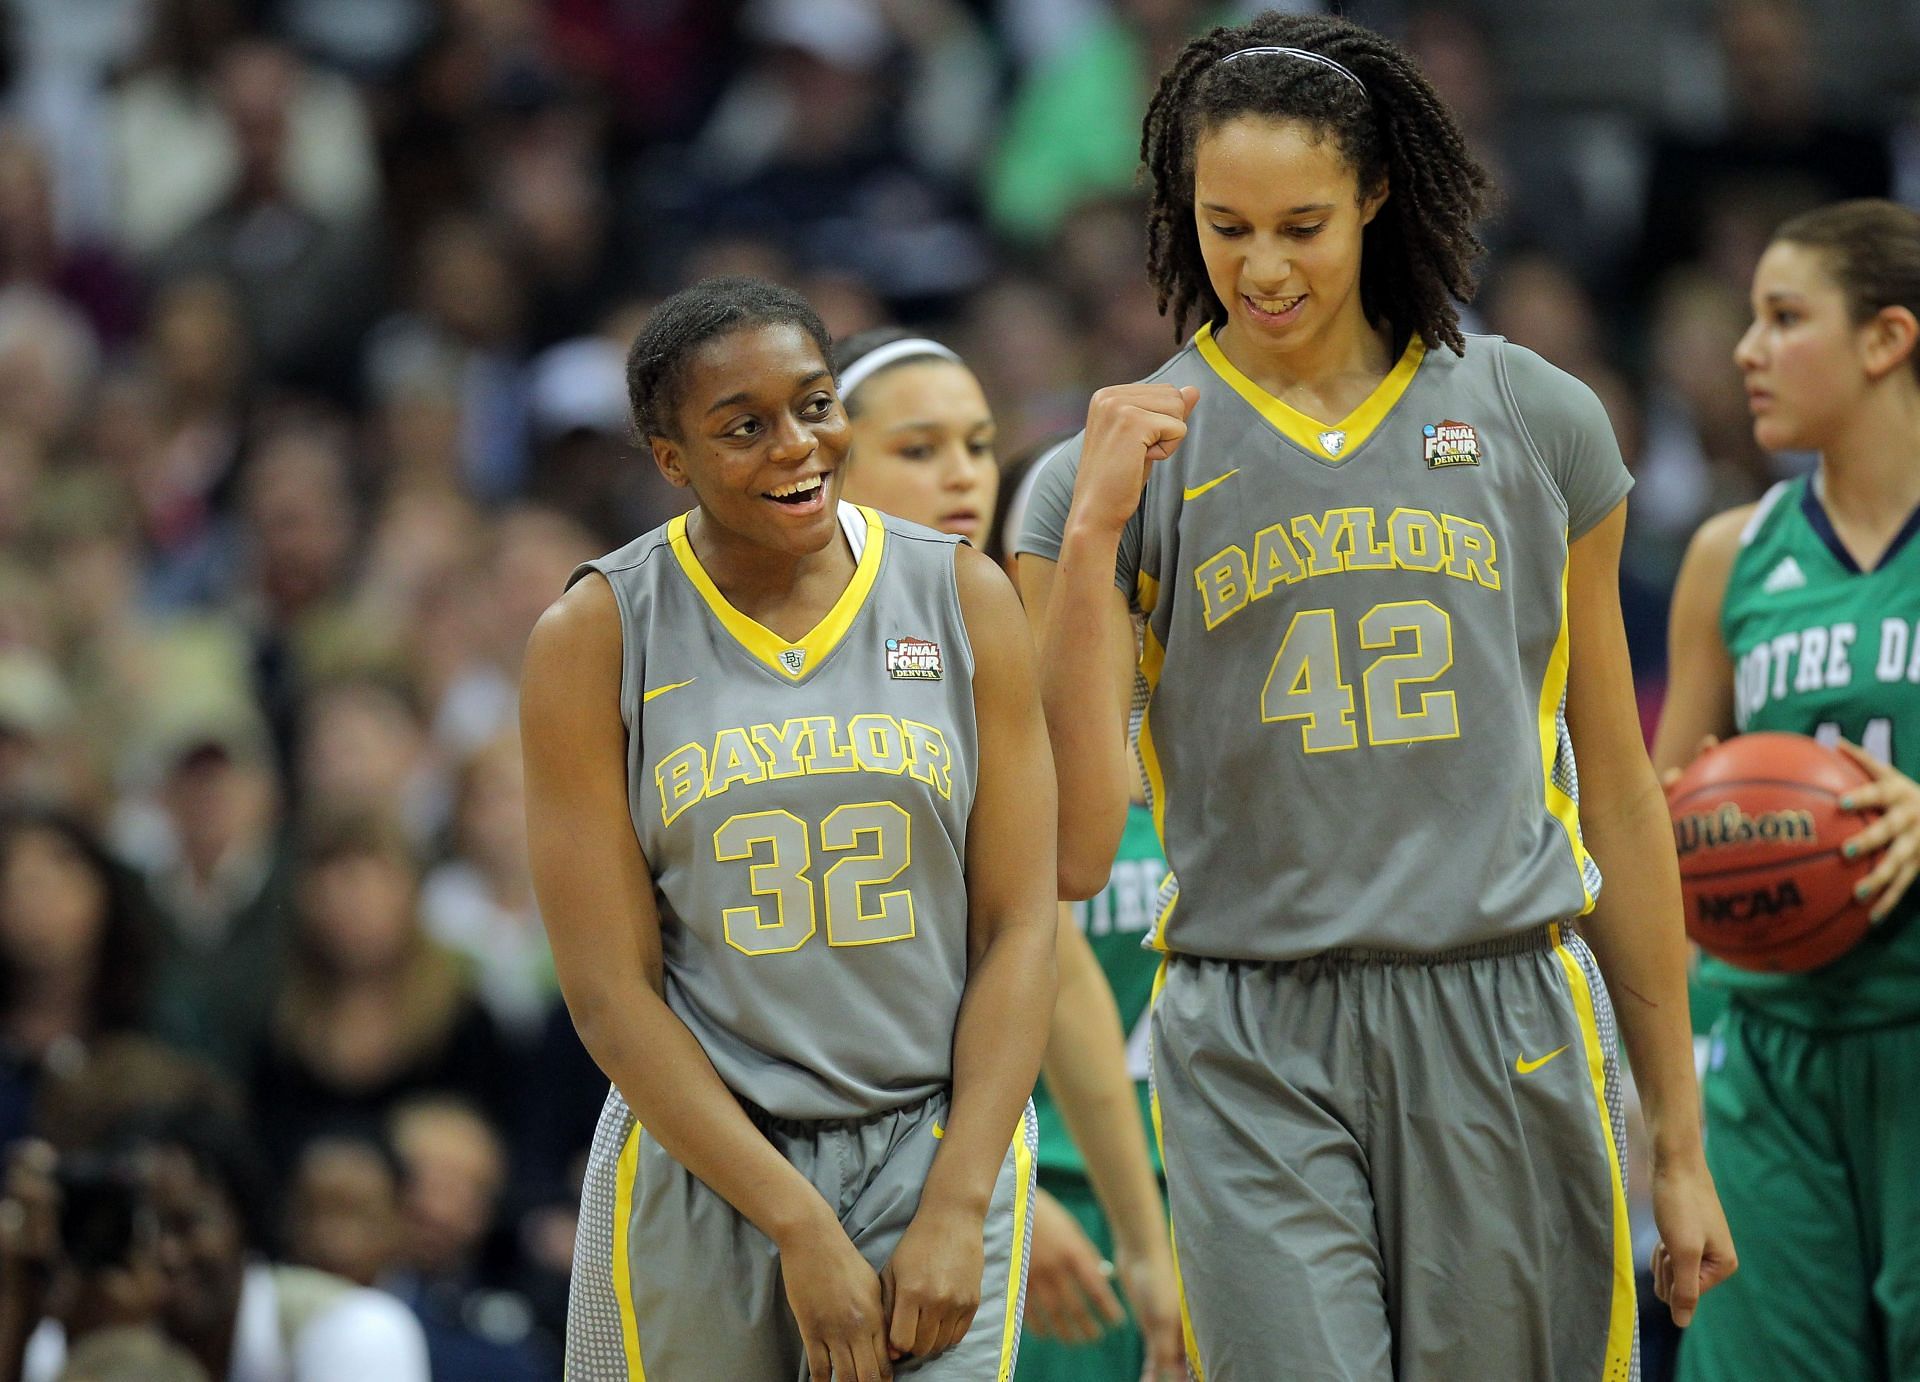 Griner played in China shortly after joining the WNBA (Image via Getty Images)